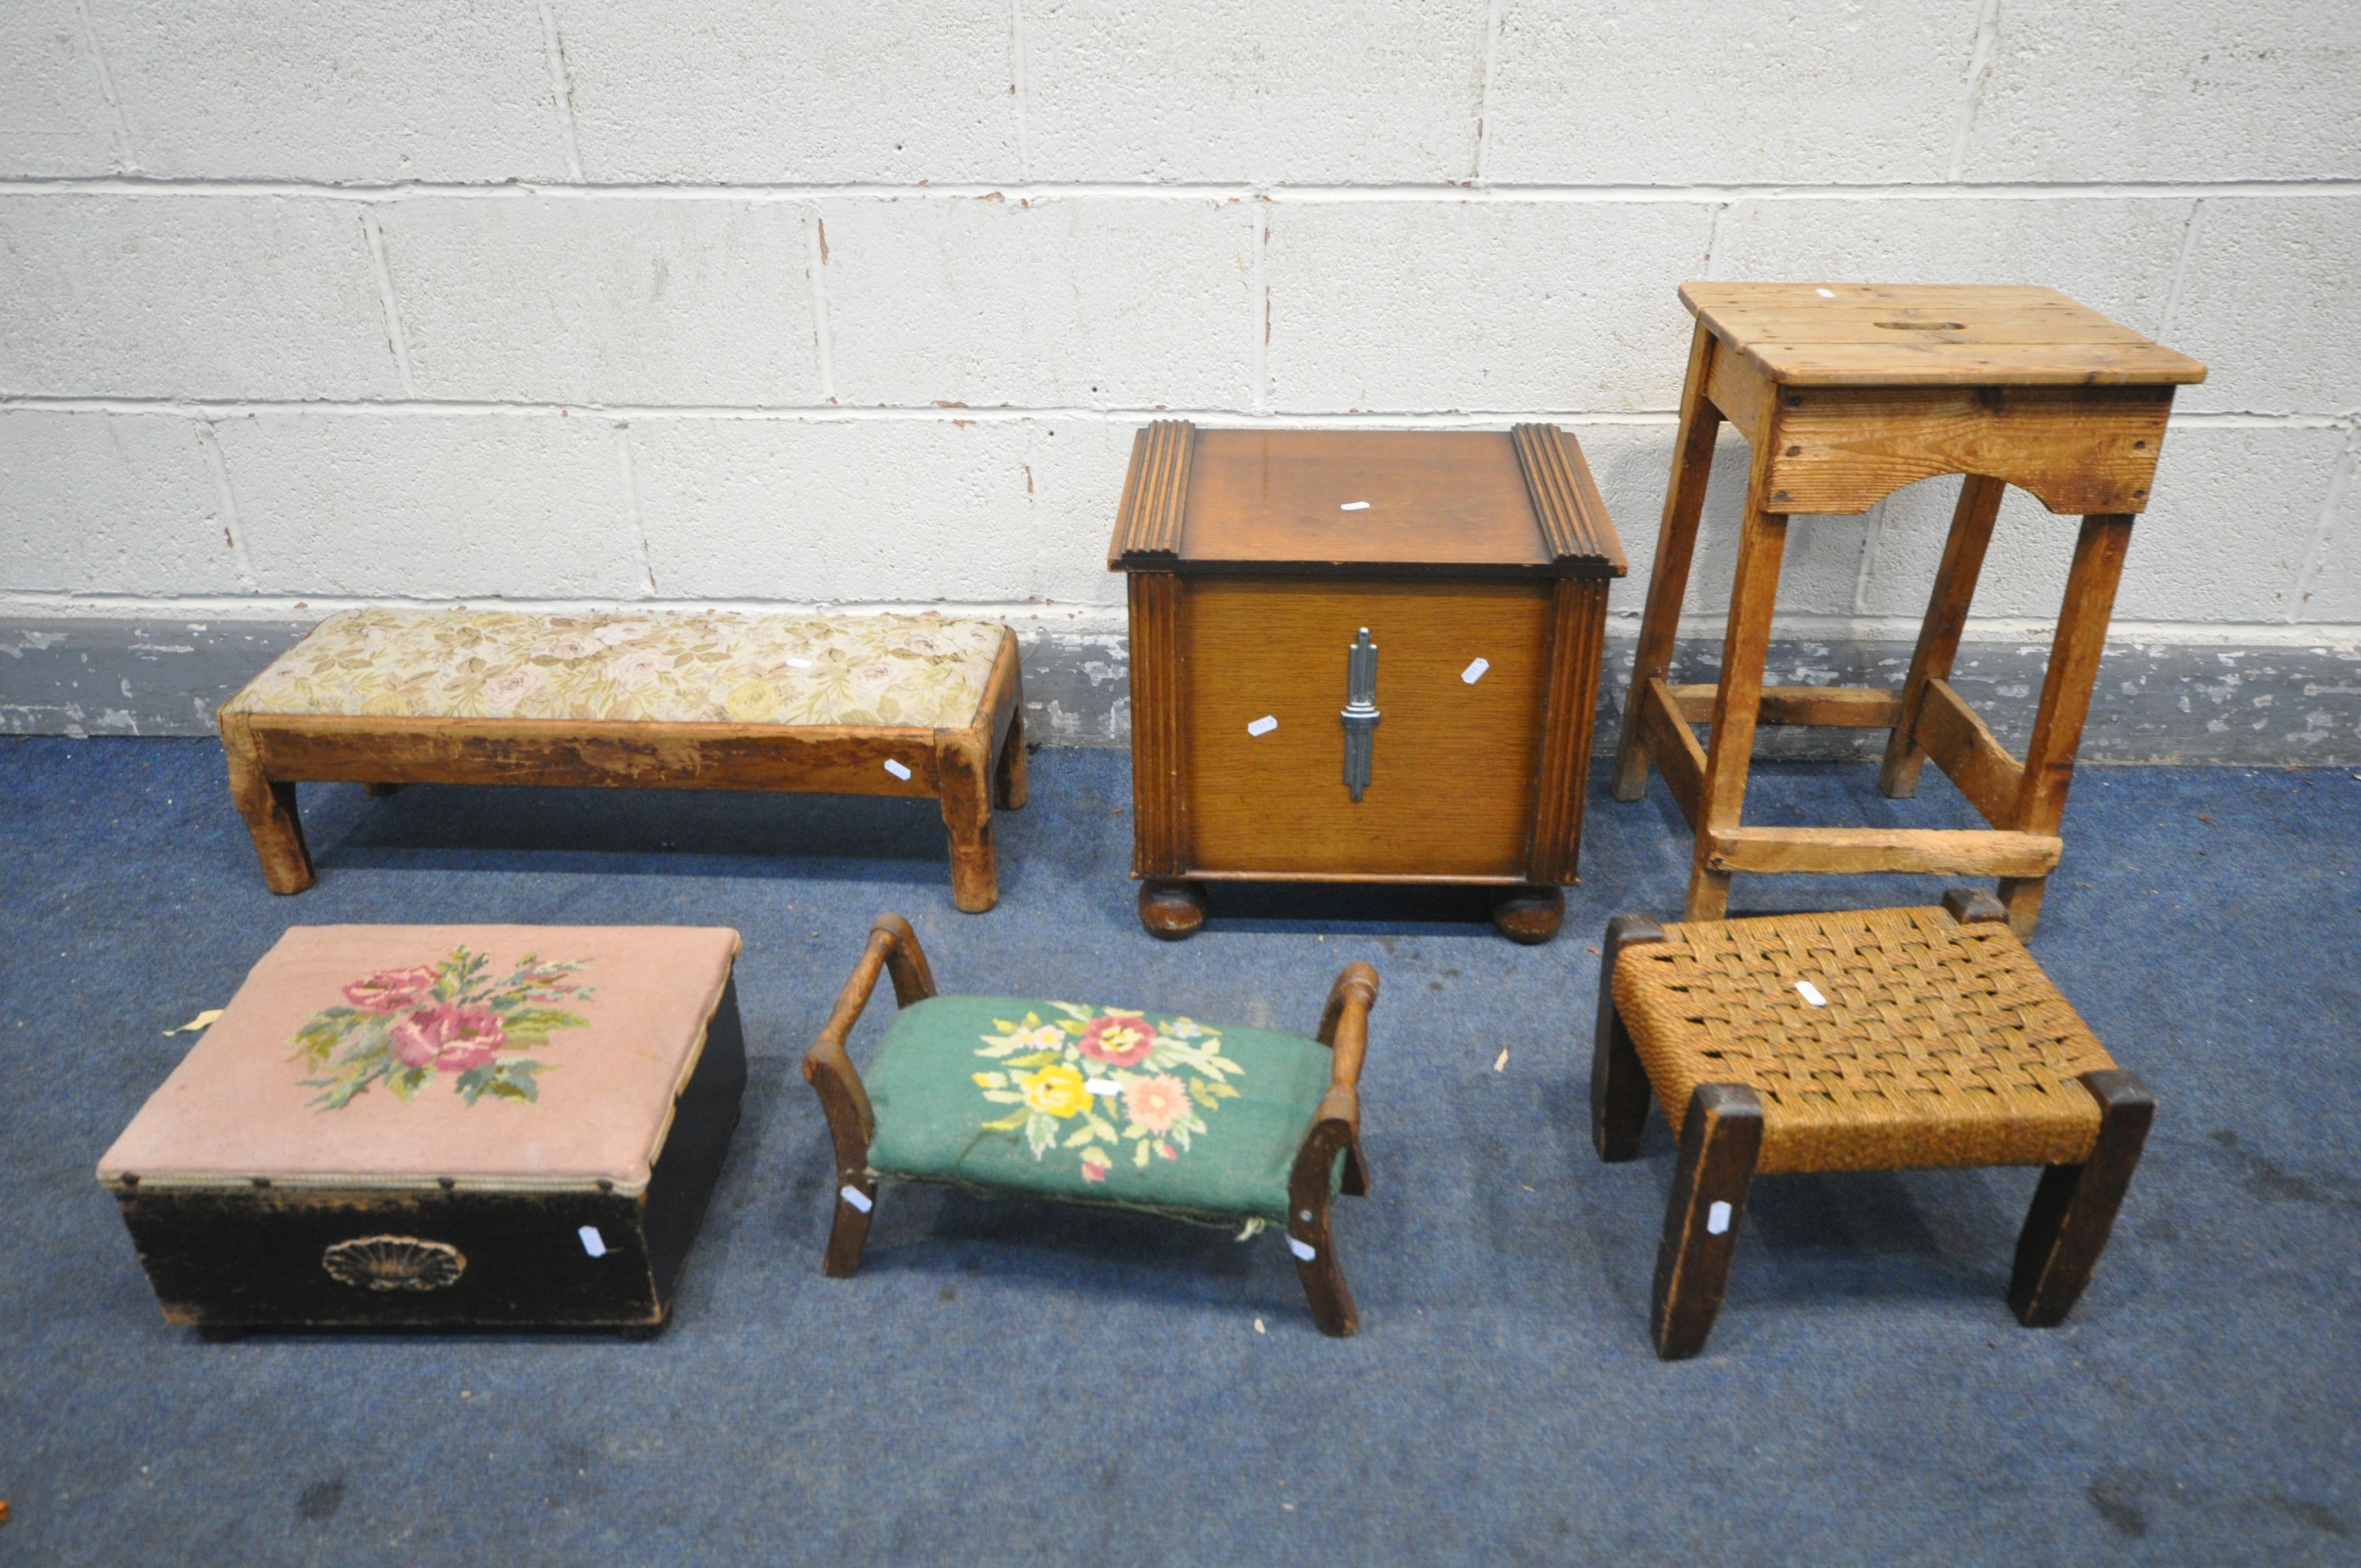 A SELECTION OF OCCASIONAL FURNITURE, to include a pine slatted stool, oak log box, long footstool,